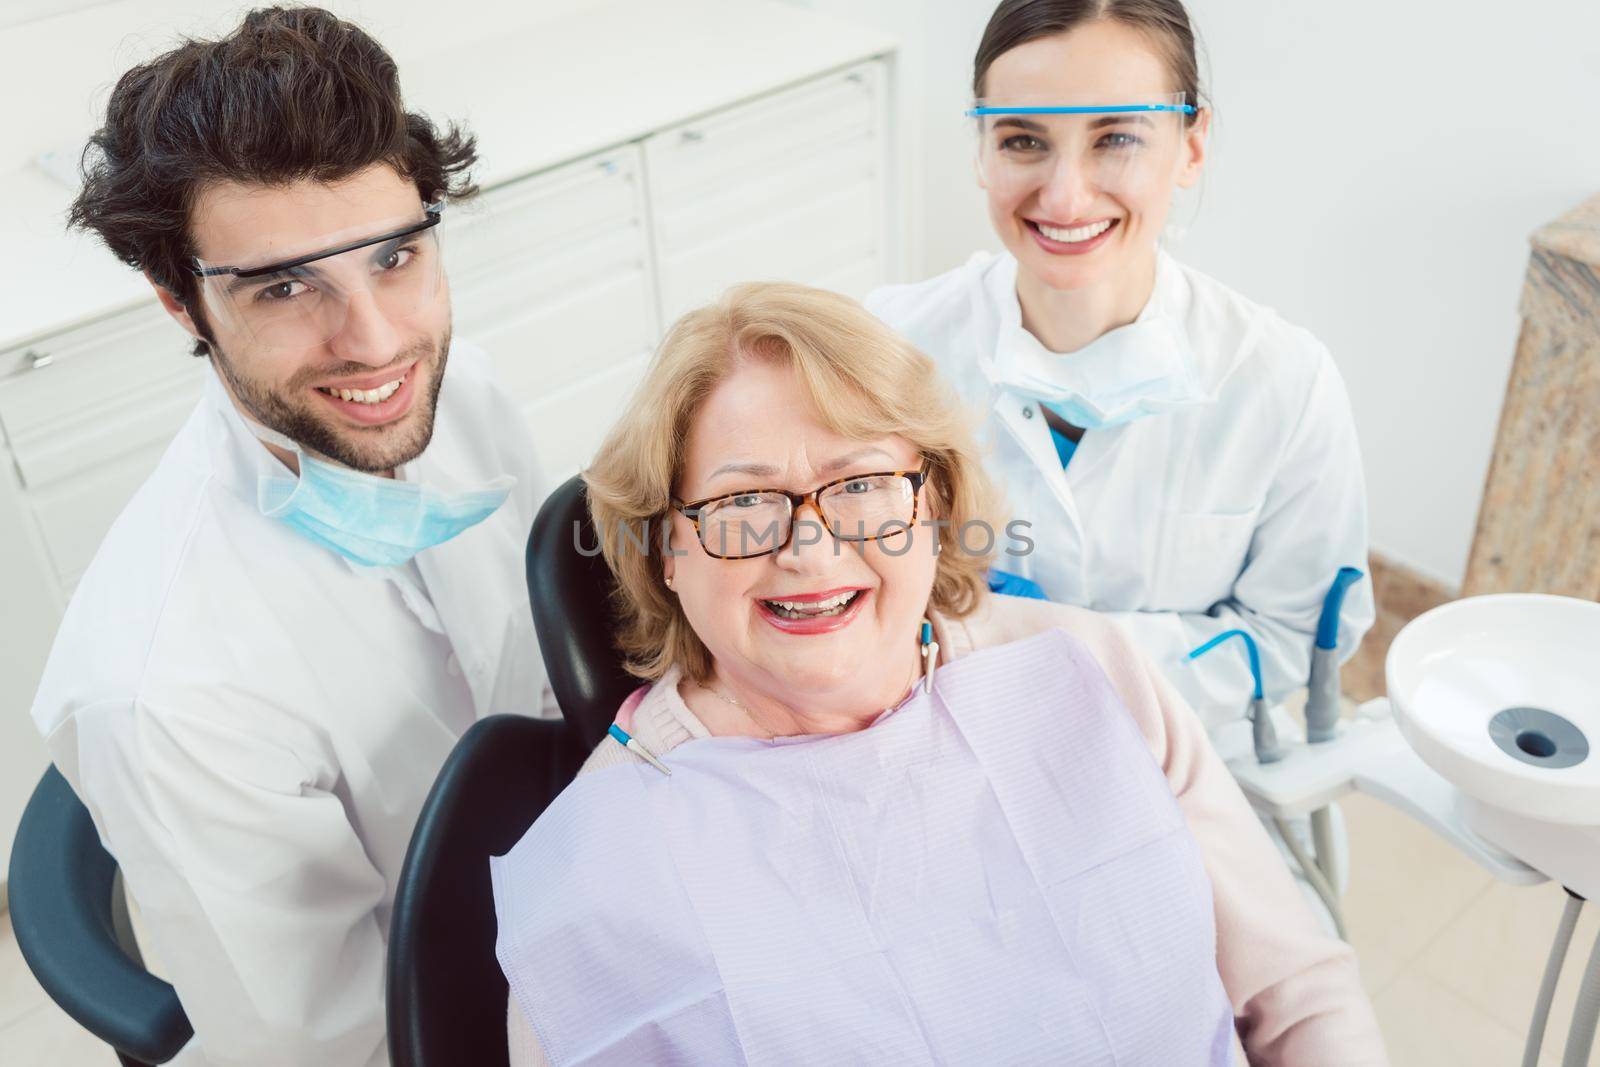 Dentists and patient in surgery looking at camera smiling